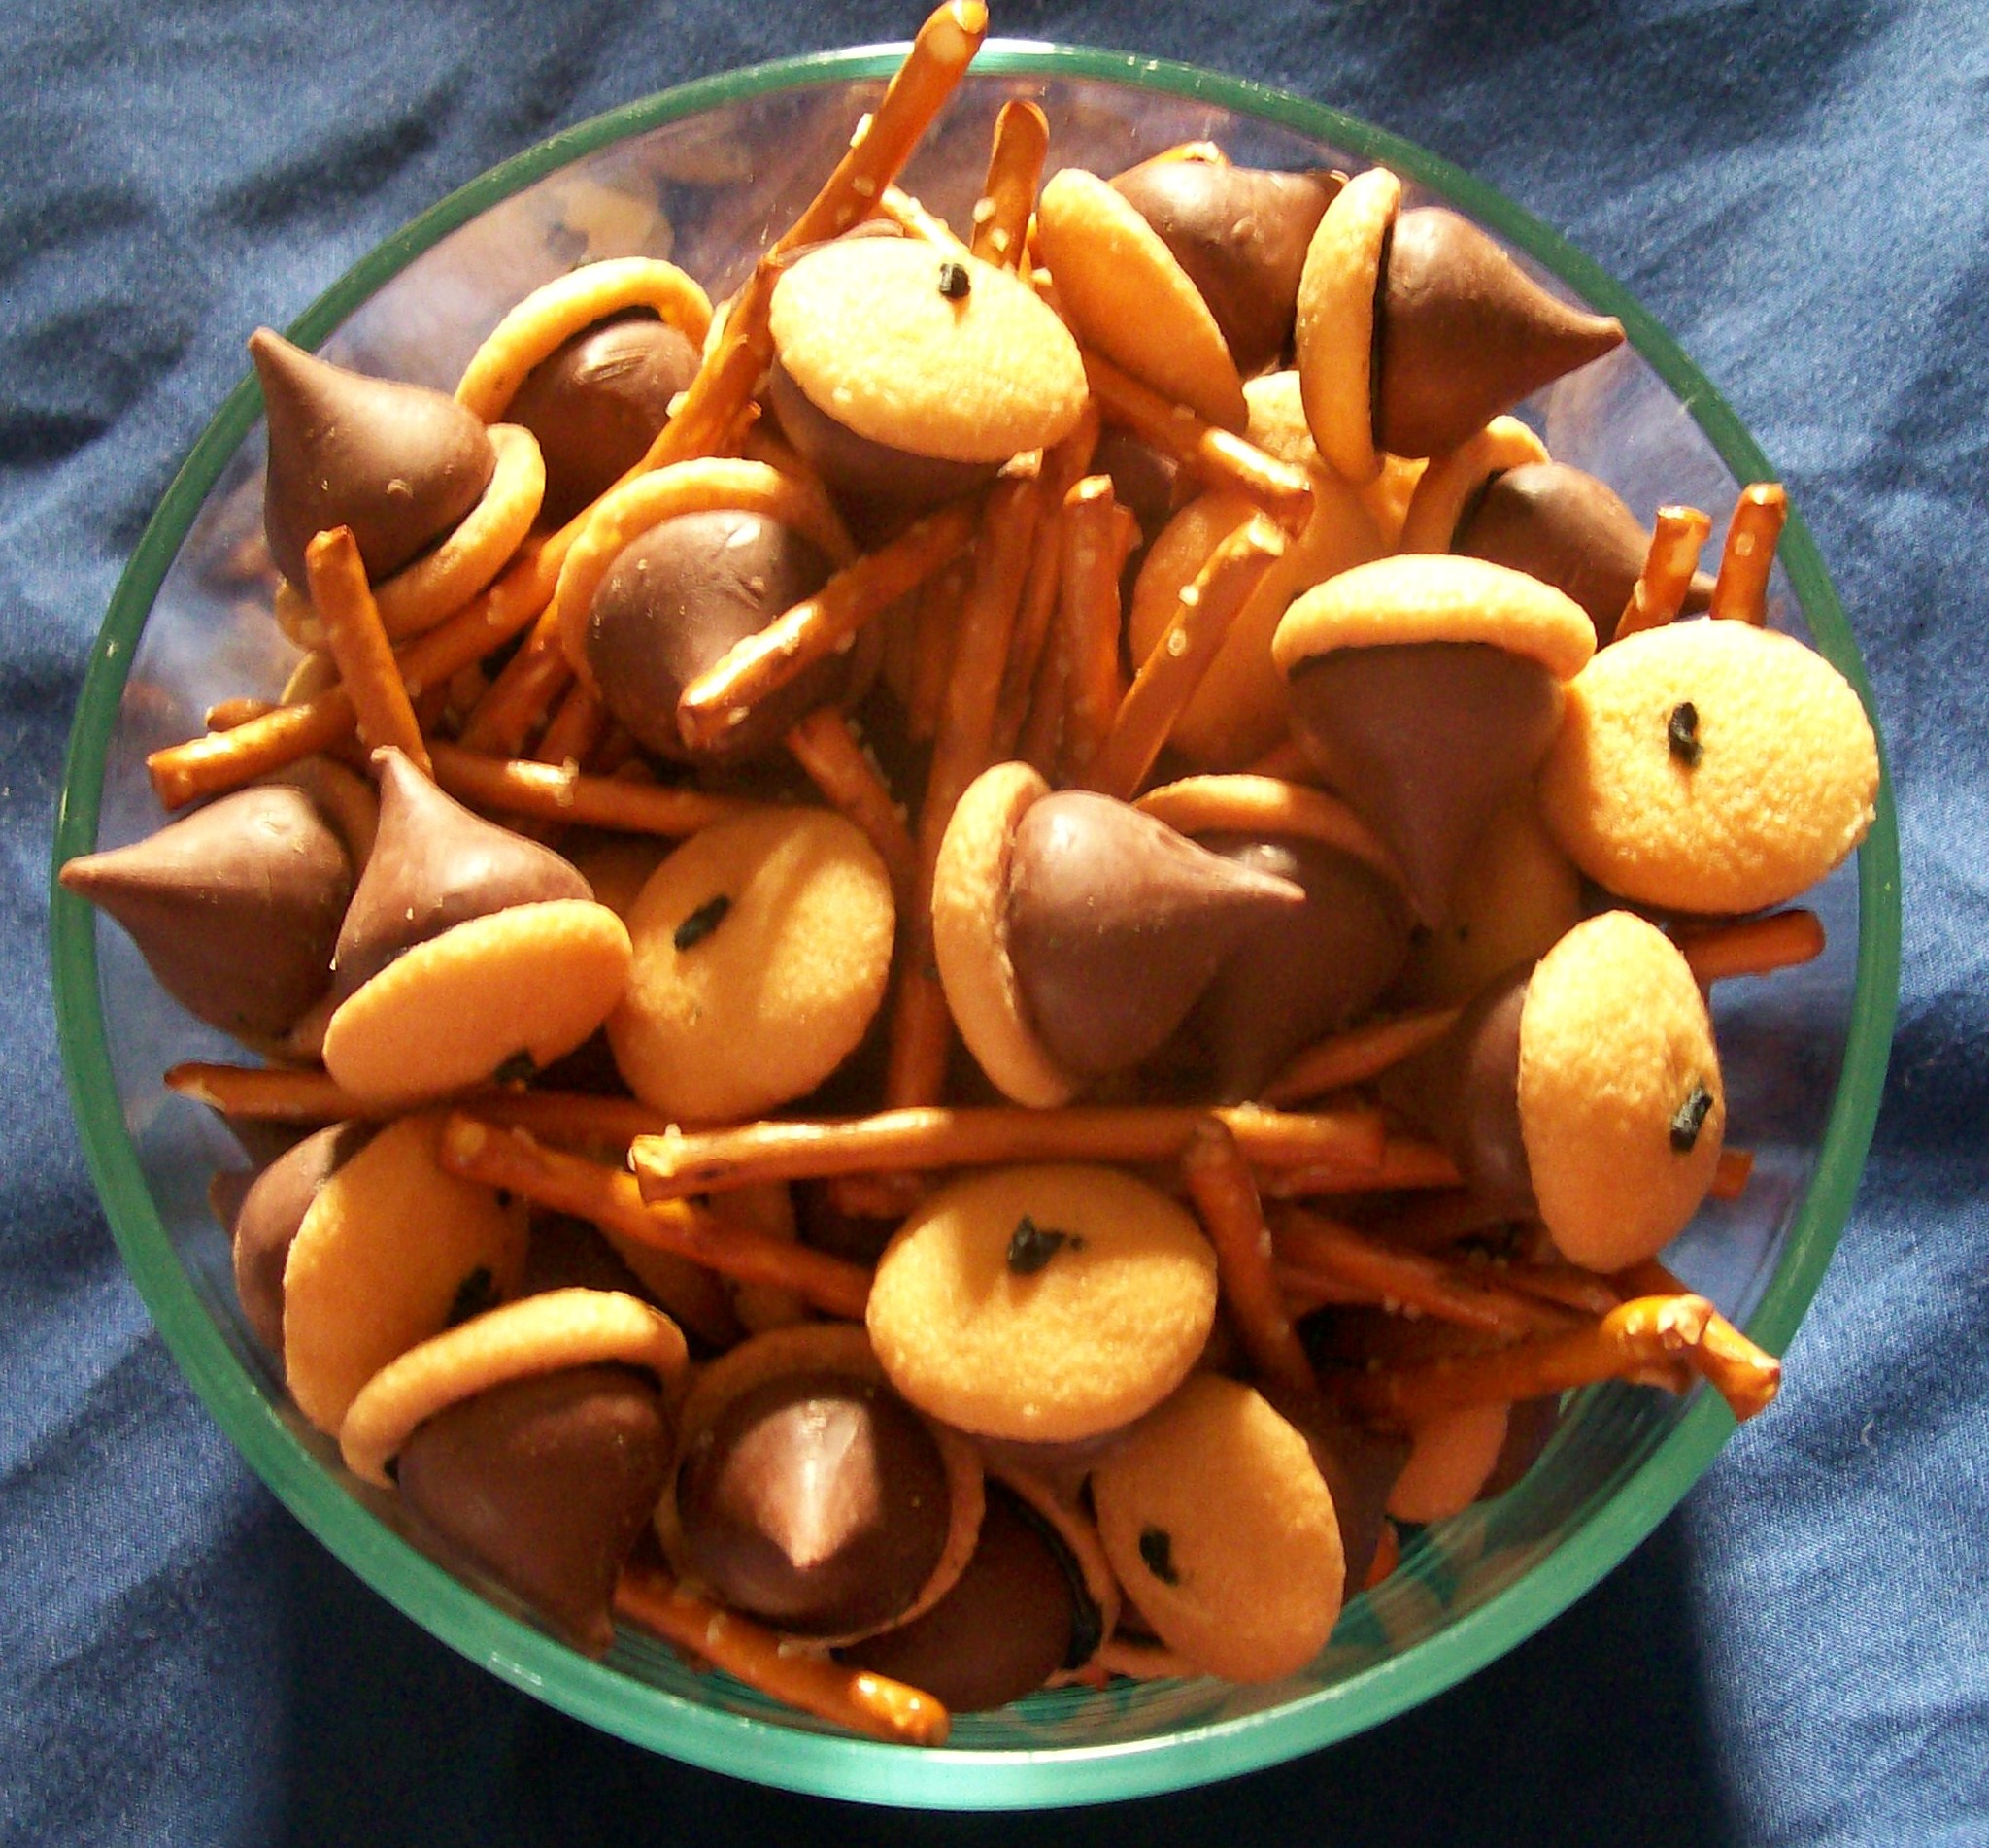 Serve Edible Sticks and Acorns for an Outdoor Themed or Camp Game Night Snack